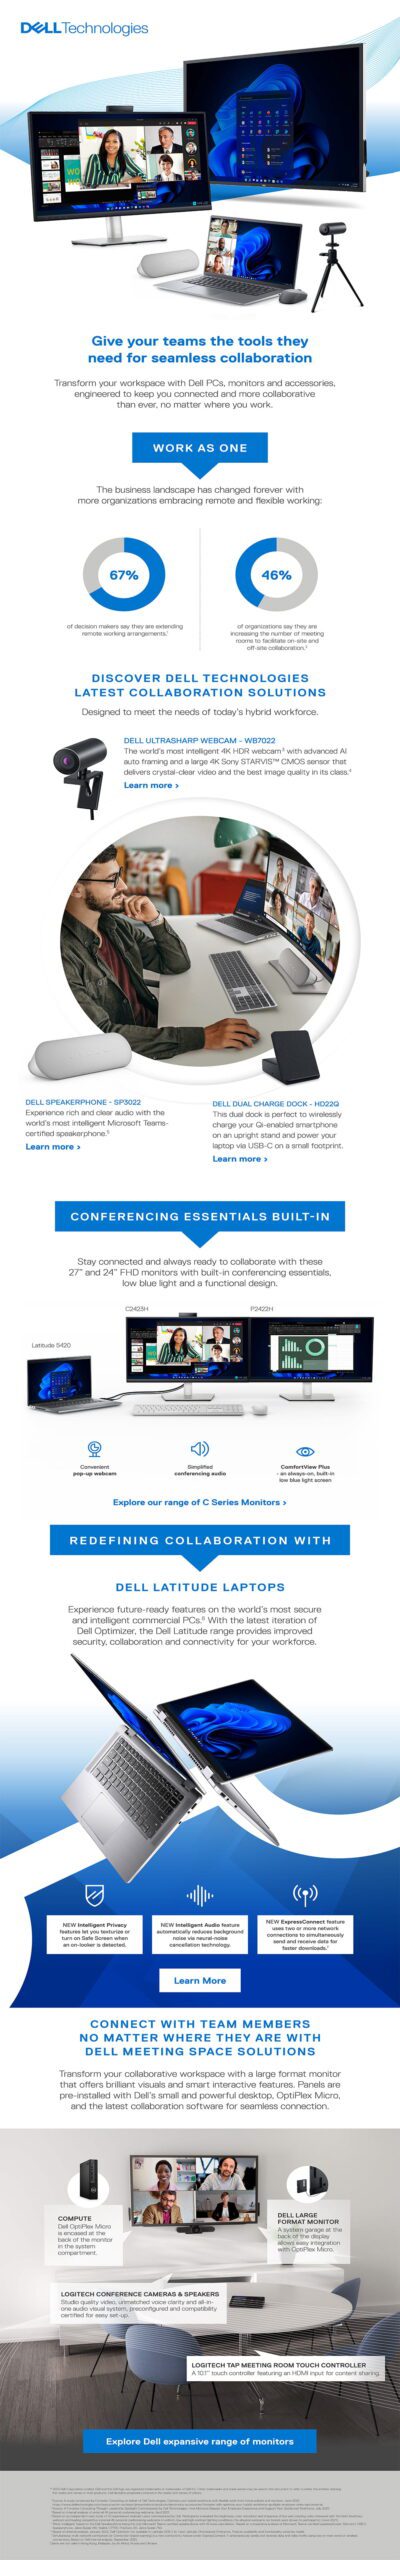 Dell Collaboration Devices Infographic